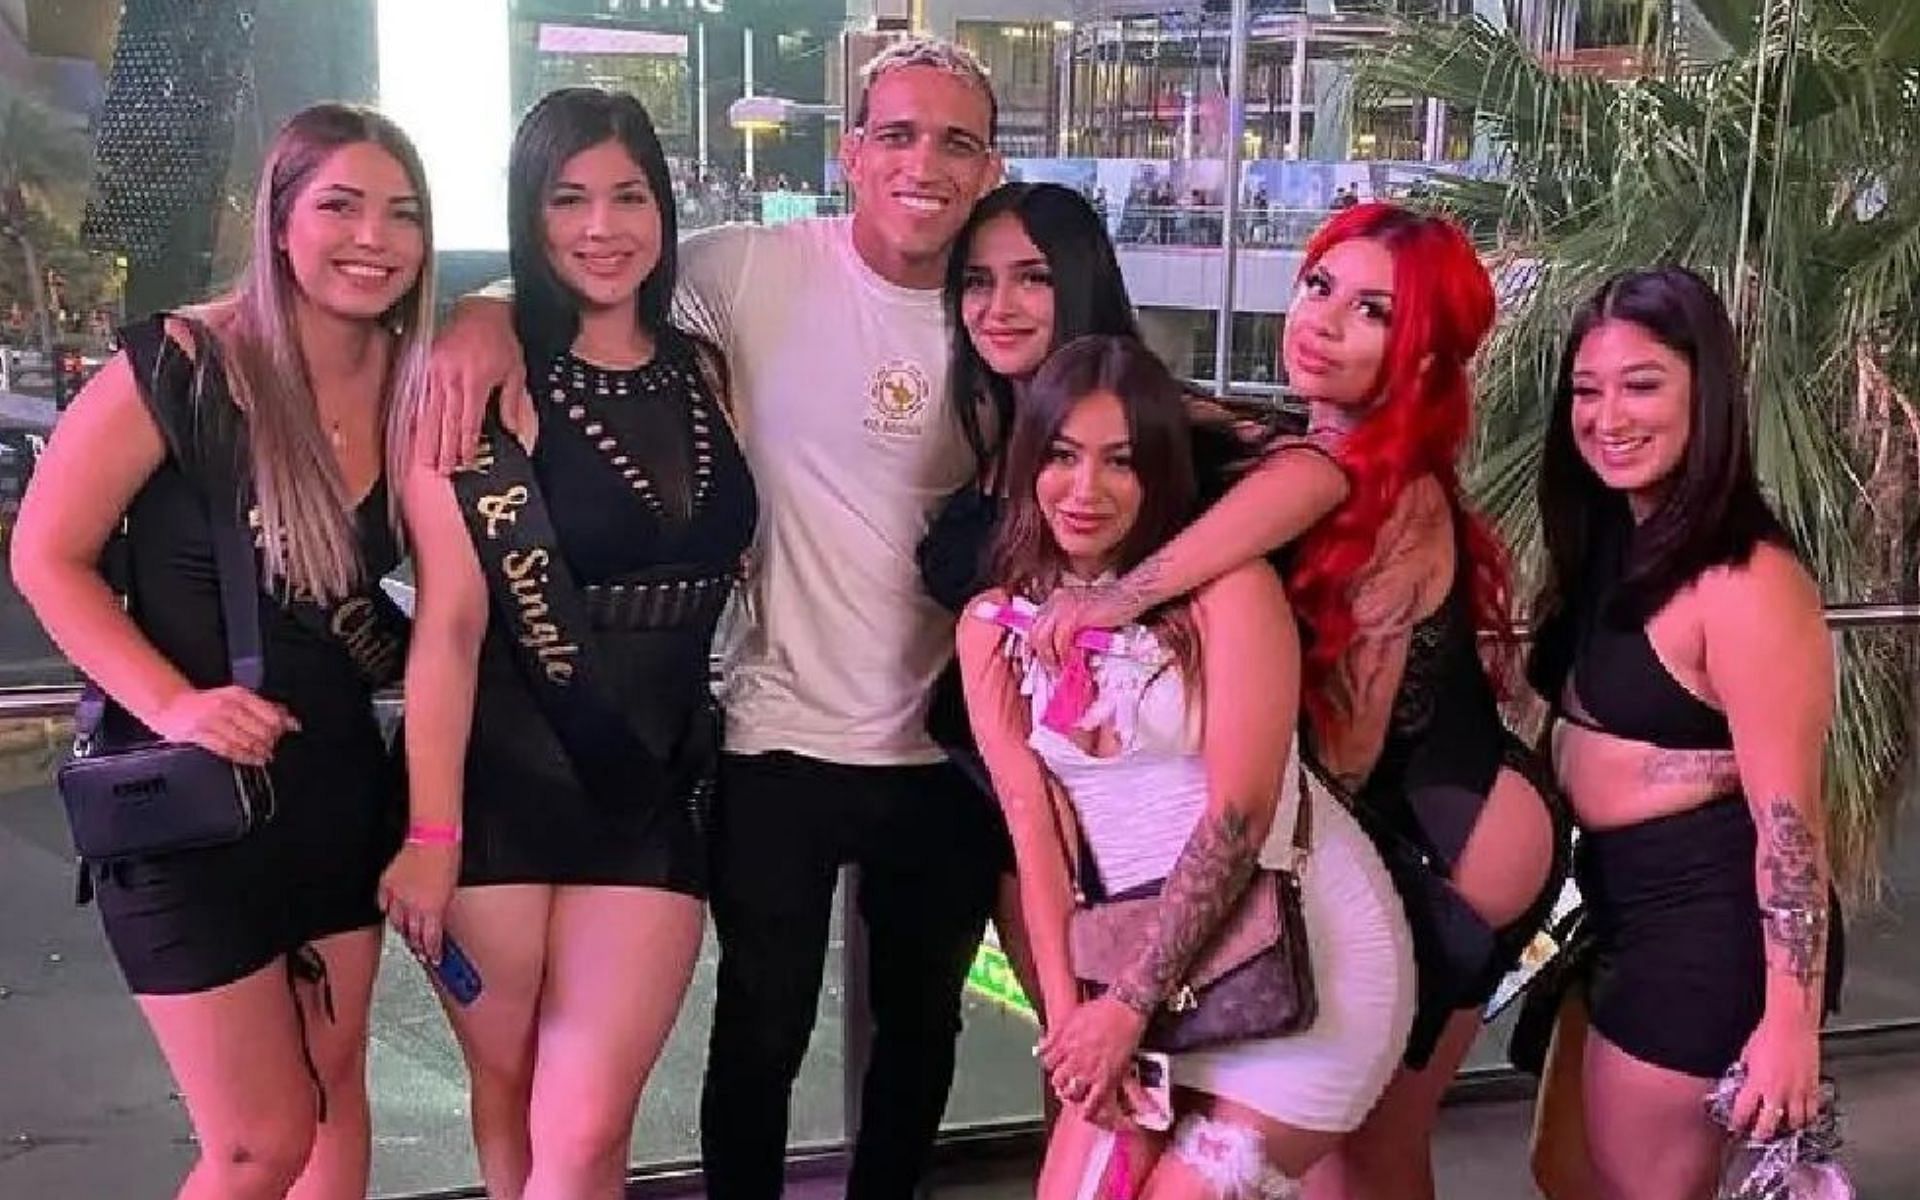 Charles Oliveira with a group of women [Images courtesy: @best.casual.mma via Instagram]